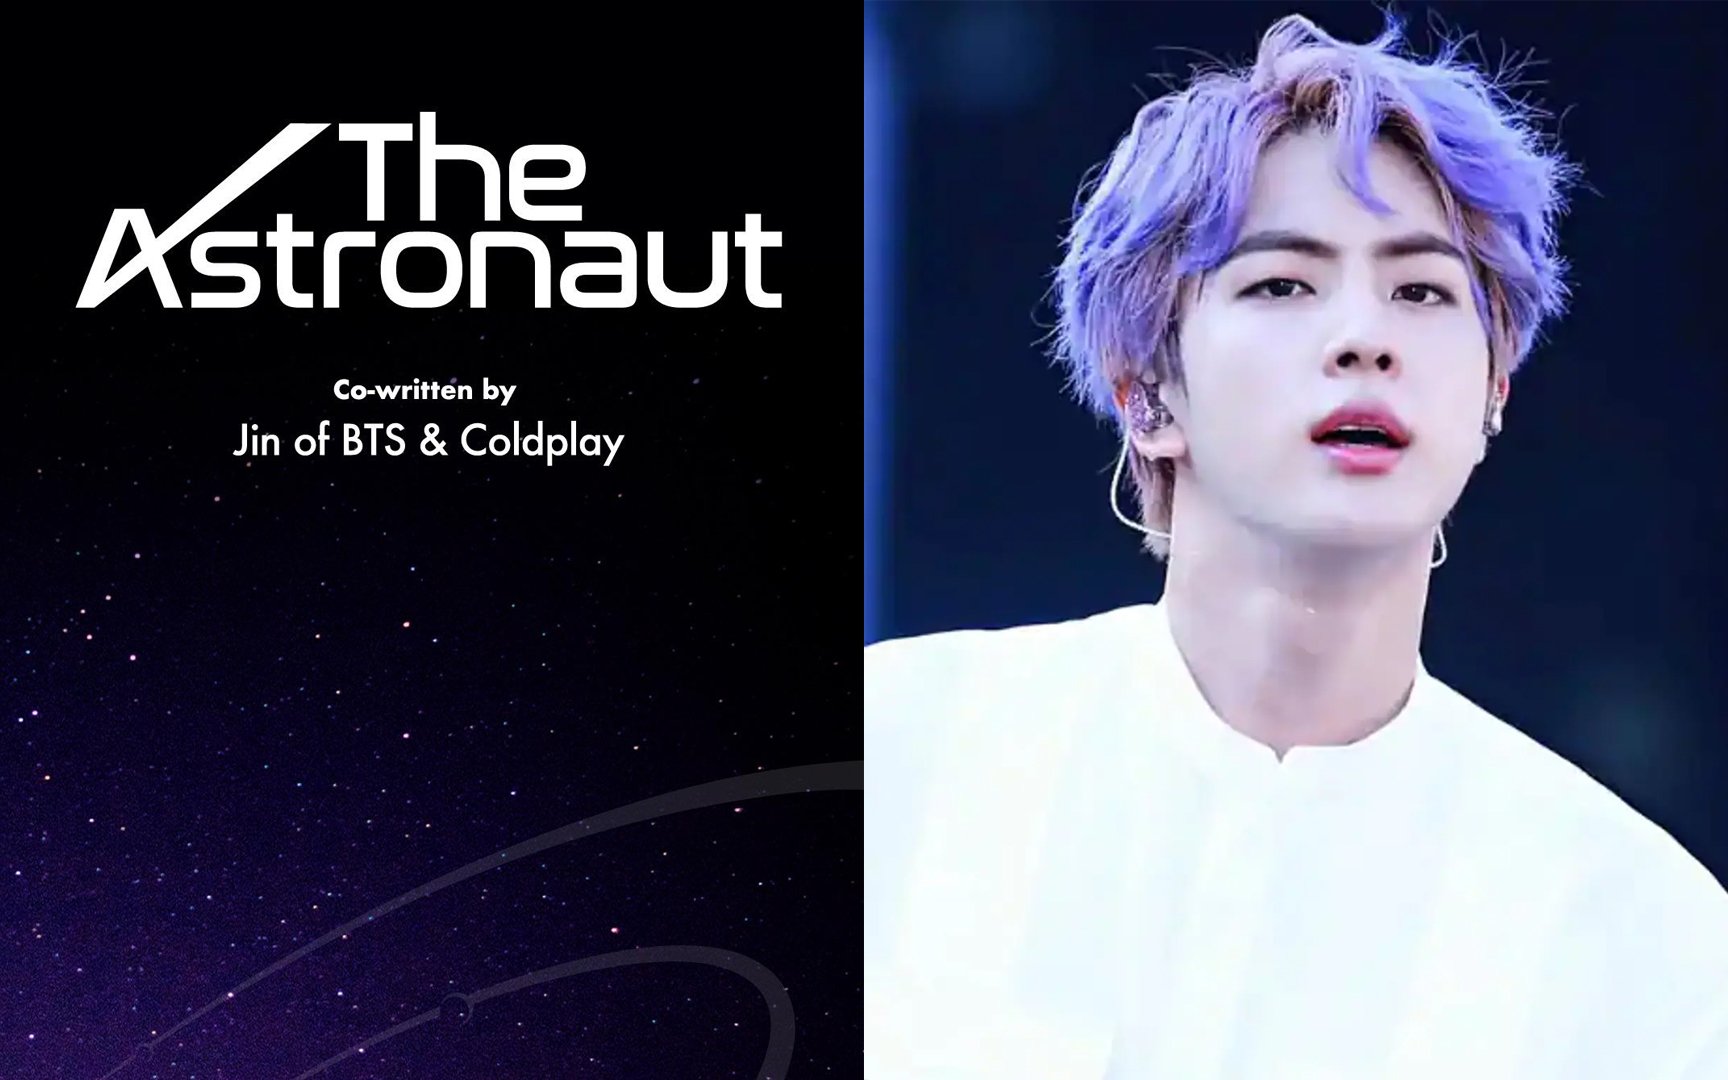 BTS's Jin drops a poster showing a celestial setting for his ...